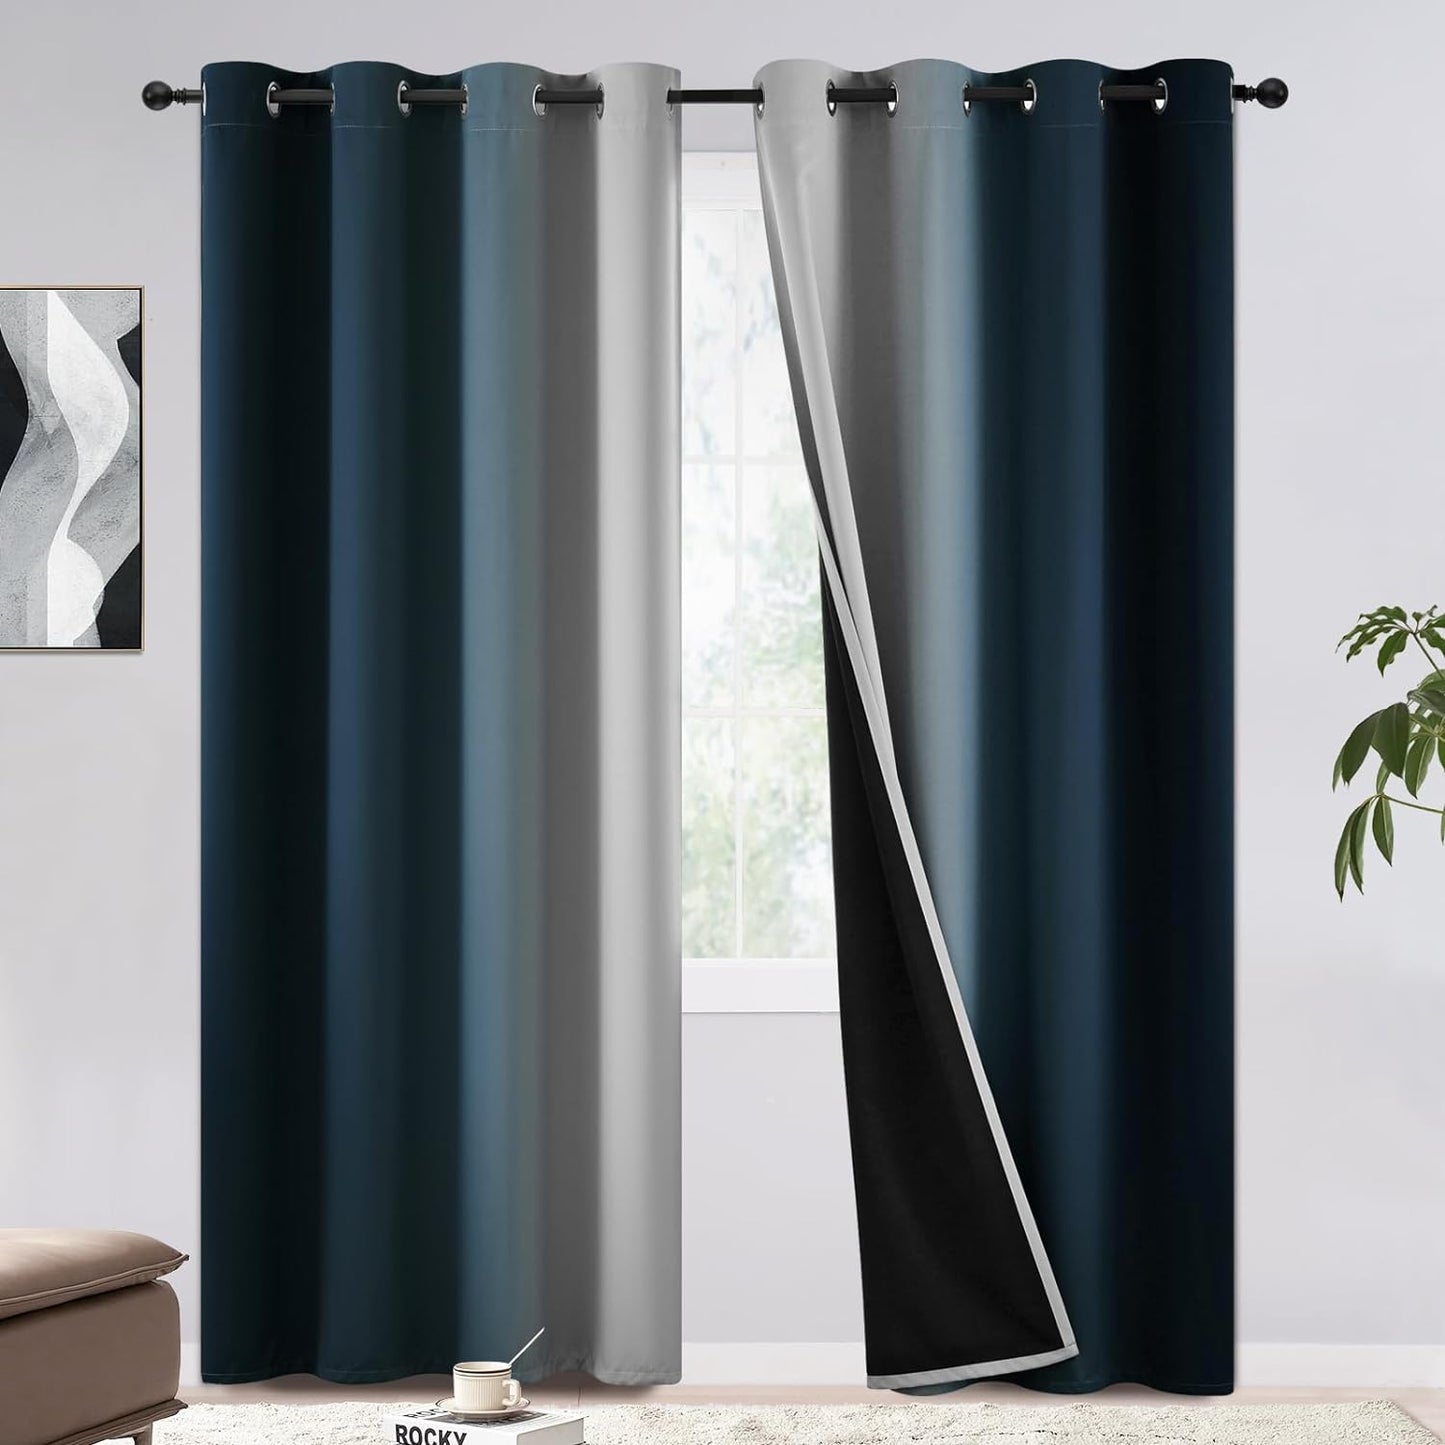 COSVIYA 100% Blackout Curtains & Drapes Ombre Purple Curtains 63 Inch Length 2 Panels,Full Room Darkening Grommet Gradient Insulated Thermal Window Curtains for Bedroom/Living Room,52X63 Inches  COSVIYA Blackout Navy To Grayish White 52W X 84L 